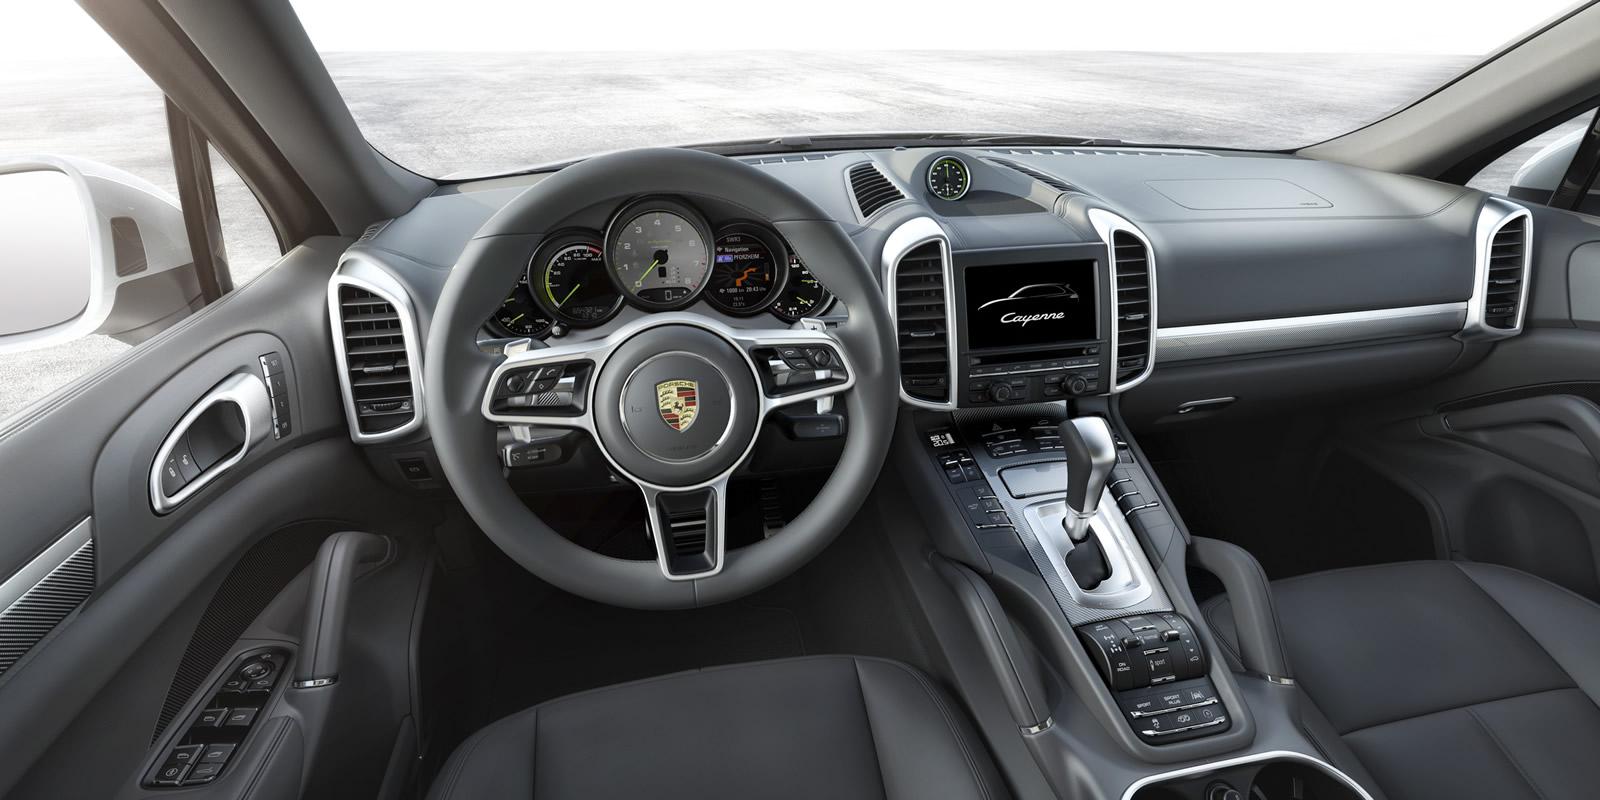 2015 Porsche Cayenne Facelift Revealed With New Engine